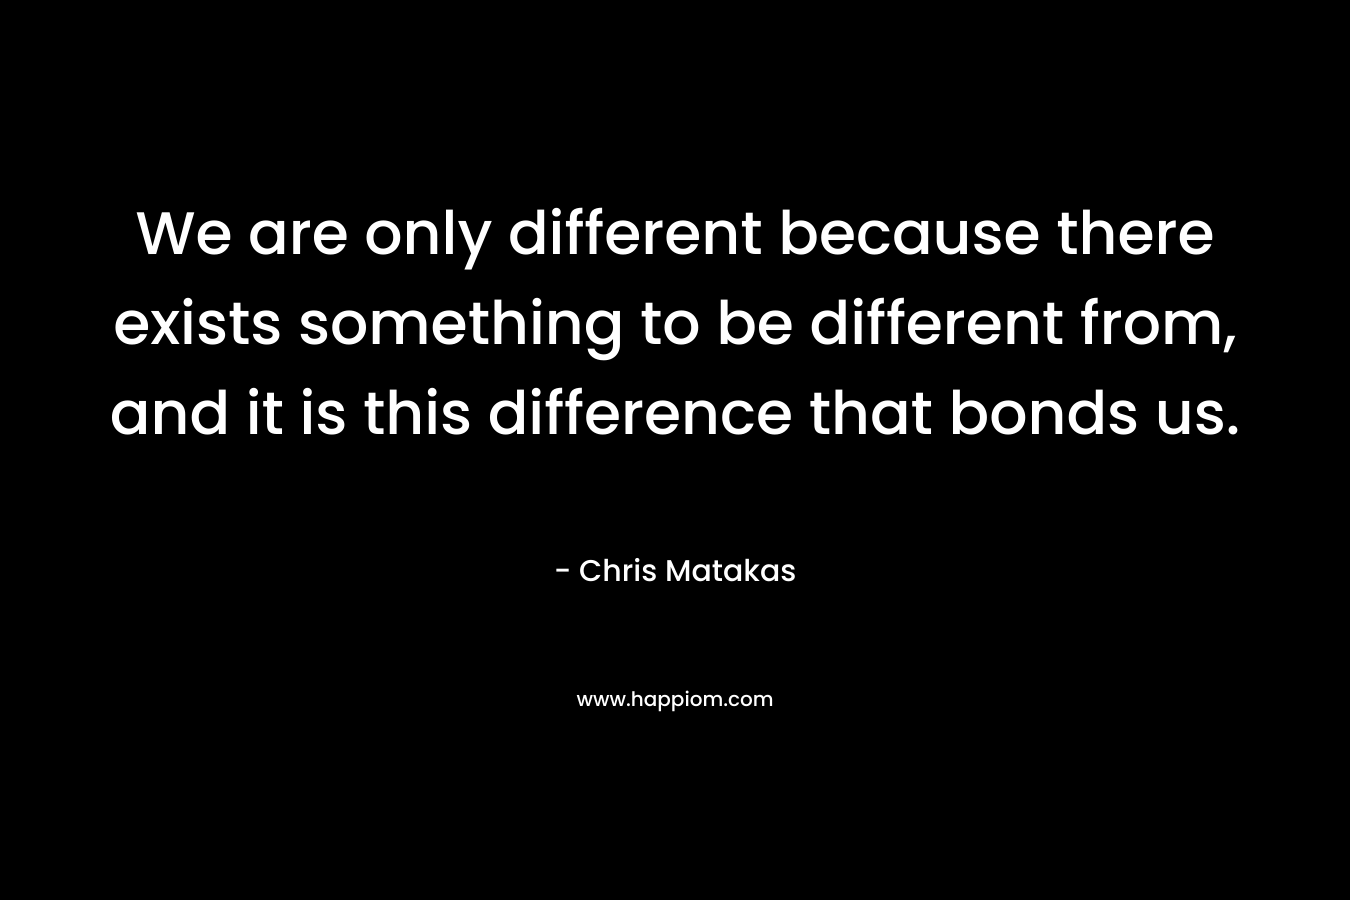 We are only different because there exists something to be different from, and it is this difference that bonds us.